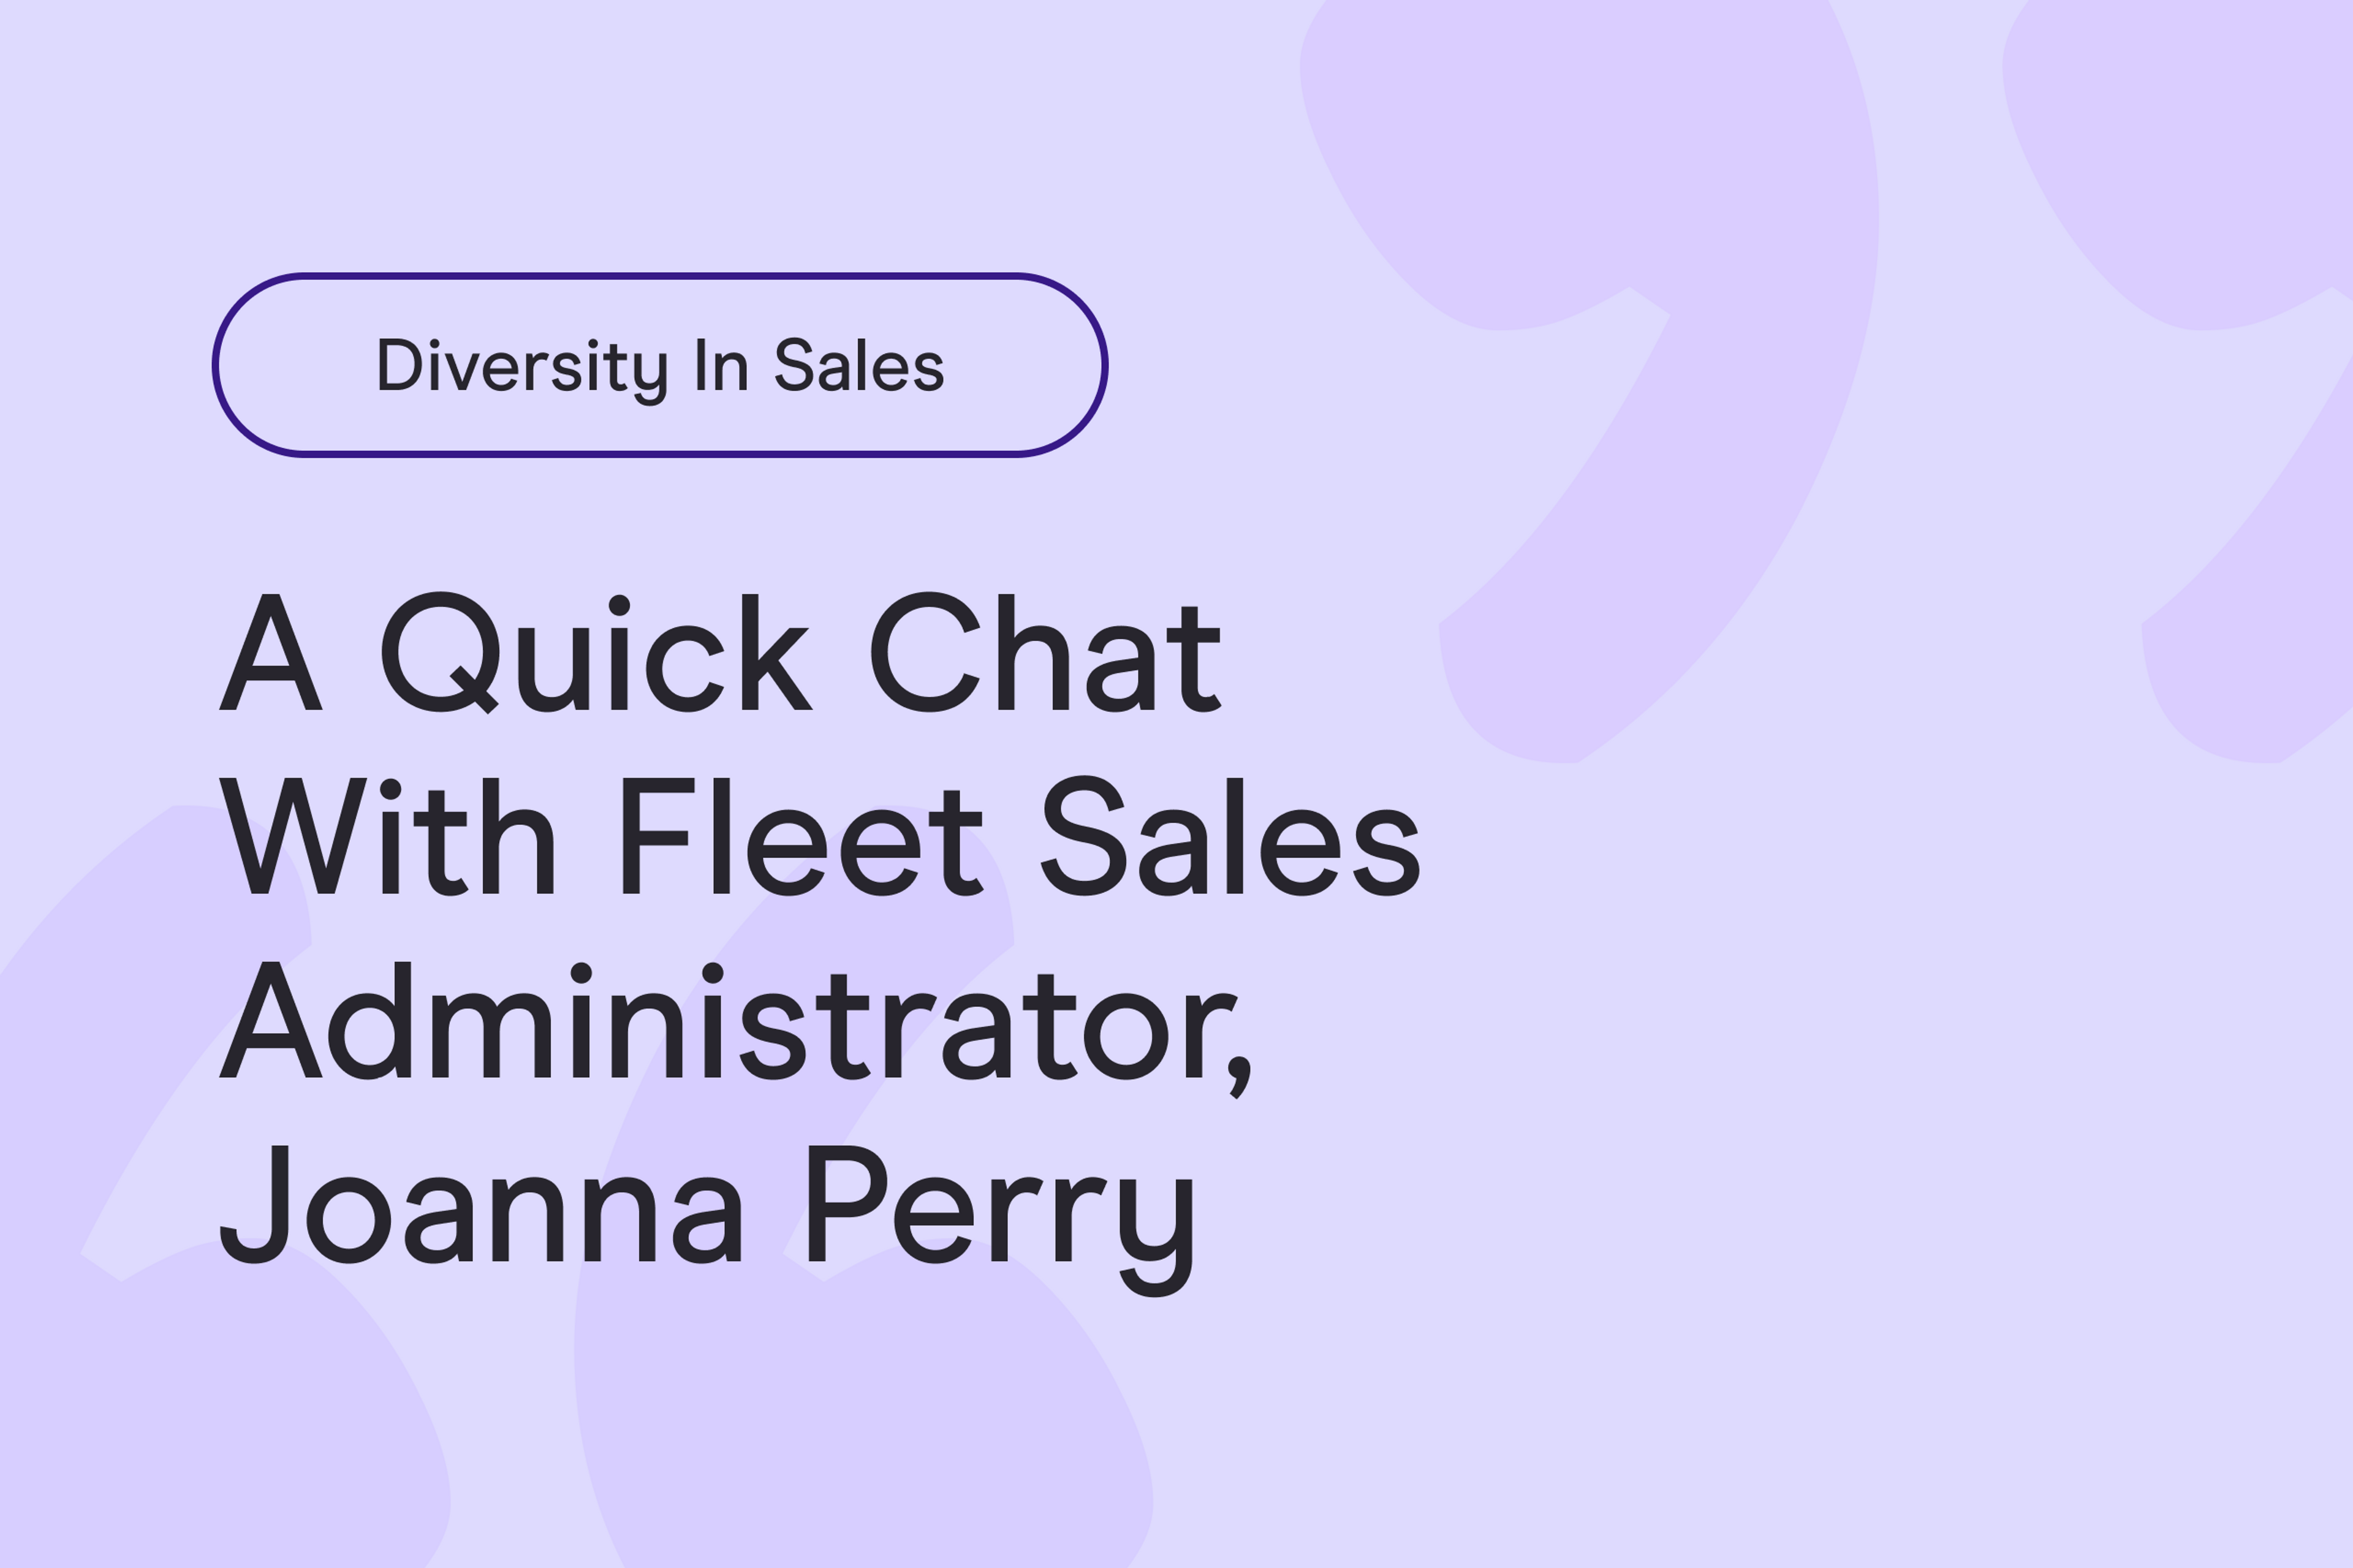 Diversity in Sales: a quick conversation with Fleet Sales Administrator and new Zegon, Joanna Perry